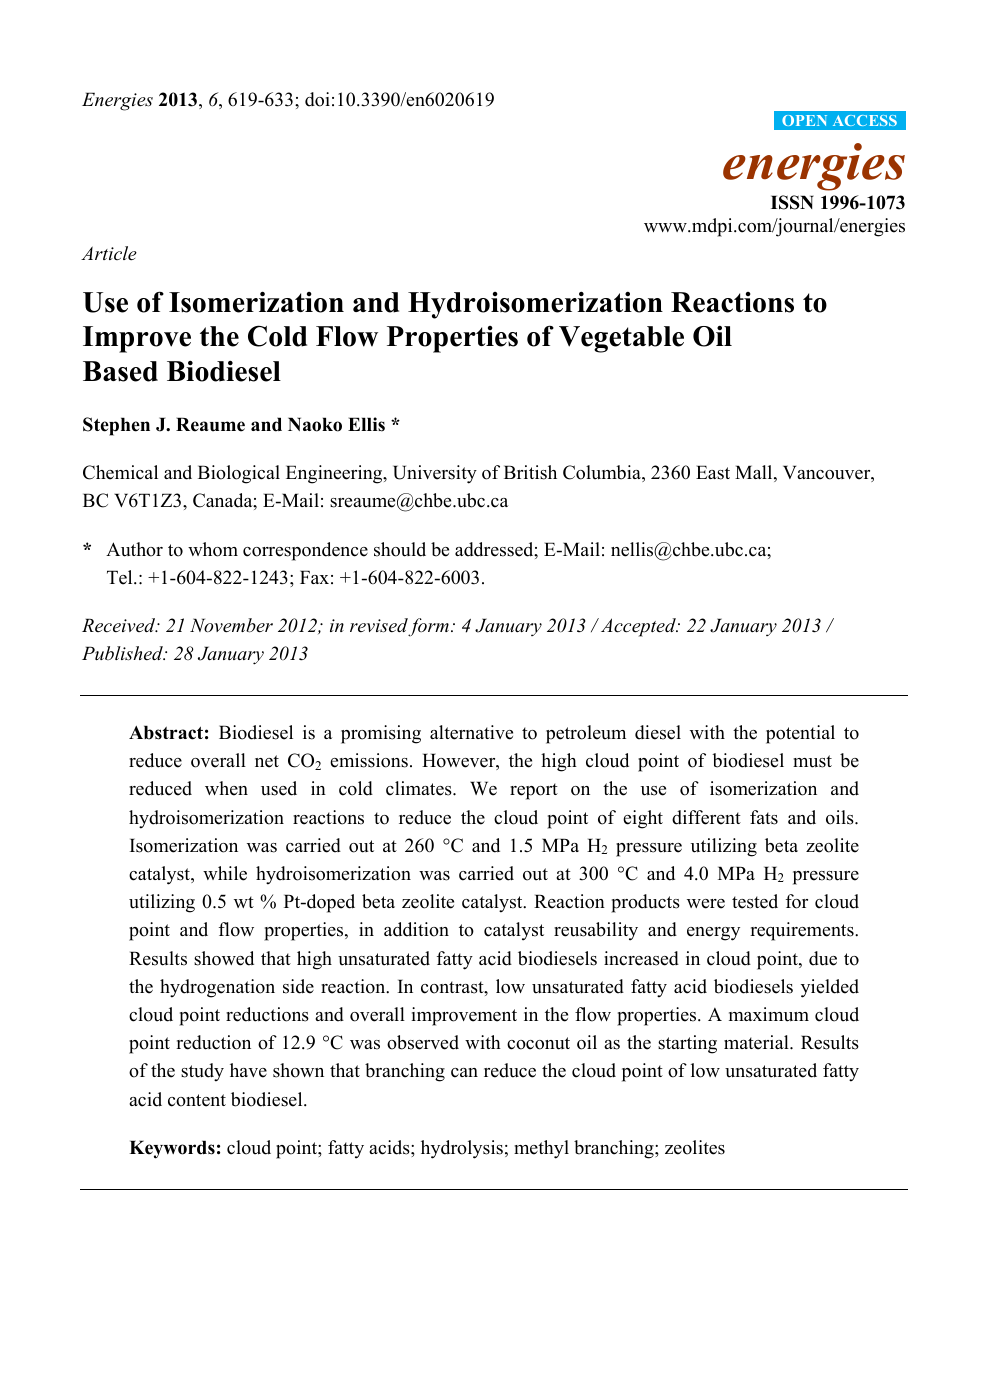 Use of Isomerization and Hydroisomerization Reactions to Improve